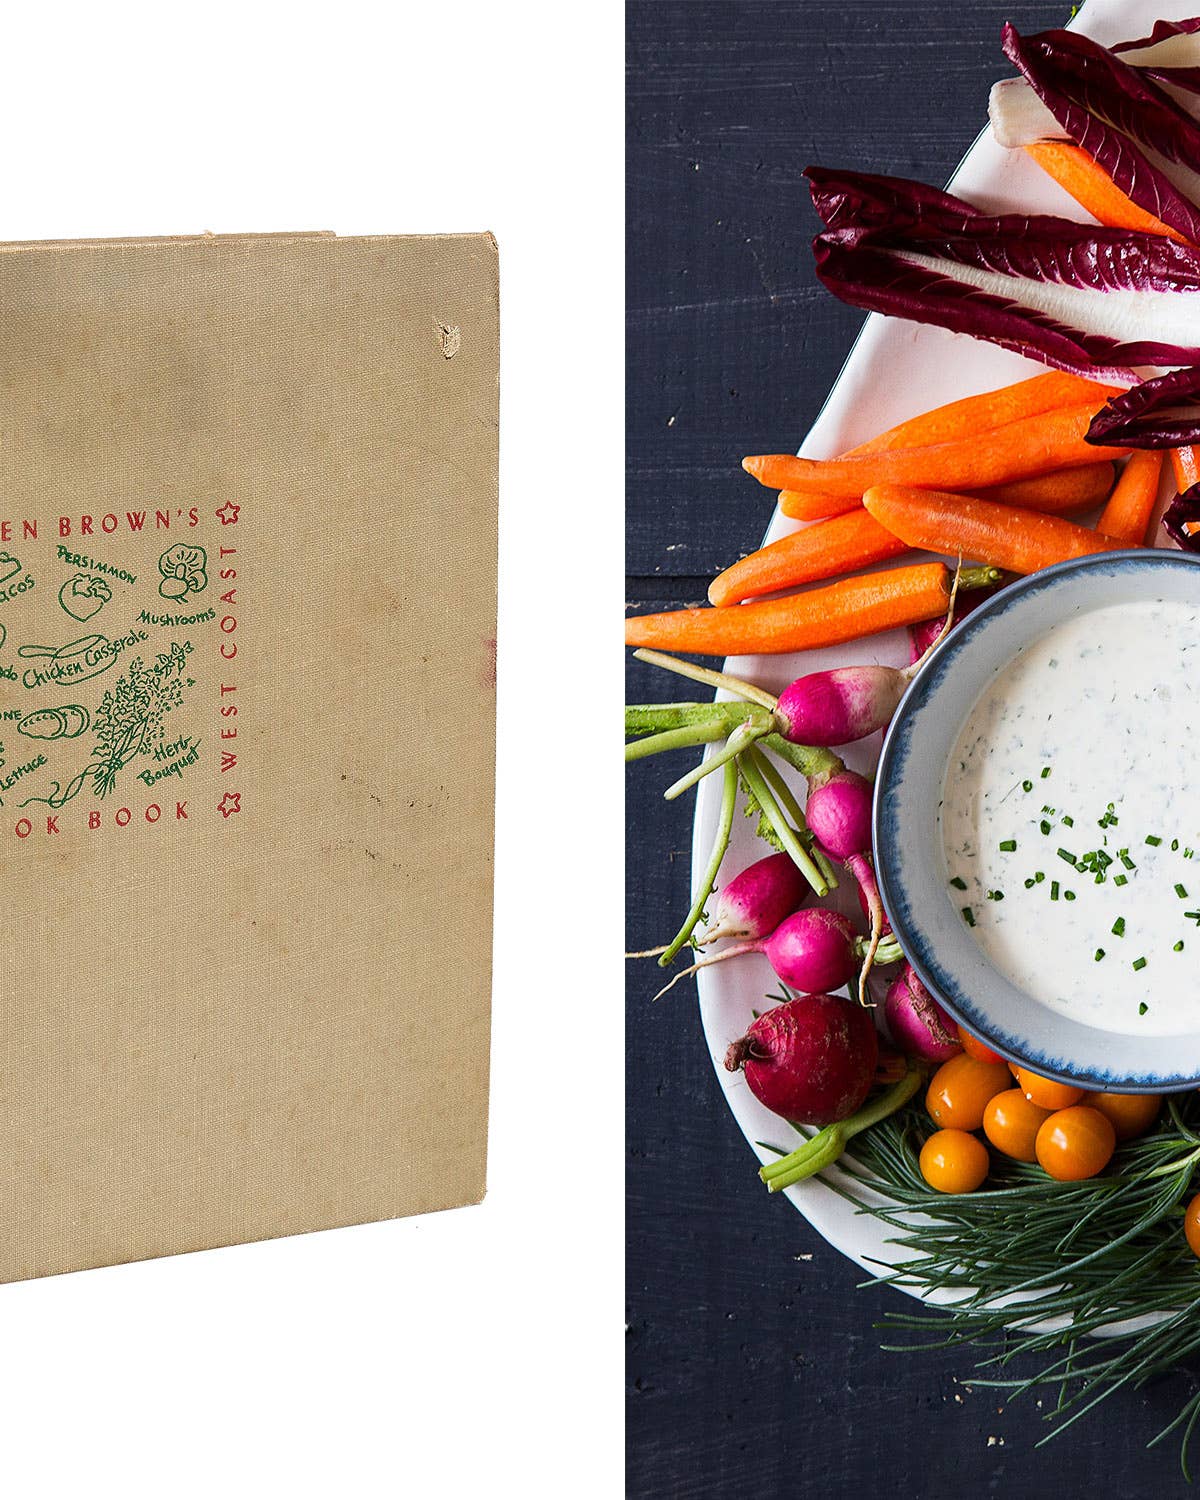 3 Classic (and Vastly Underappreciated) Books That Changed the Way We Cook